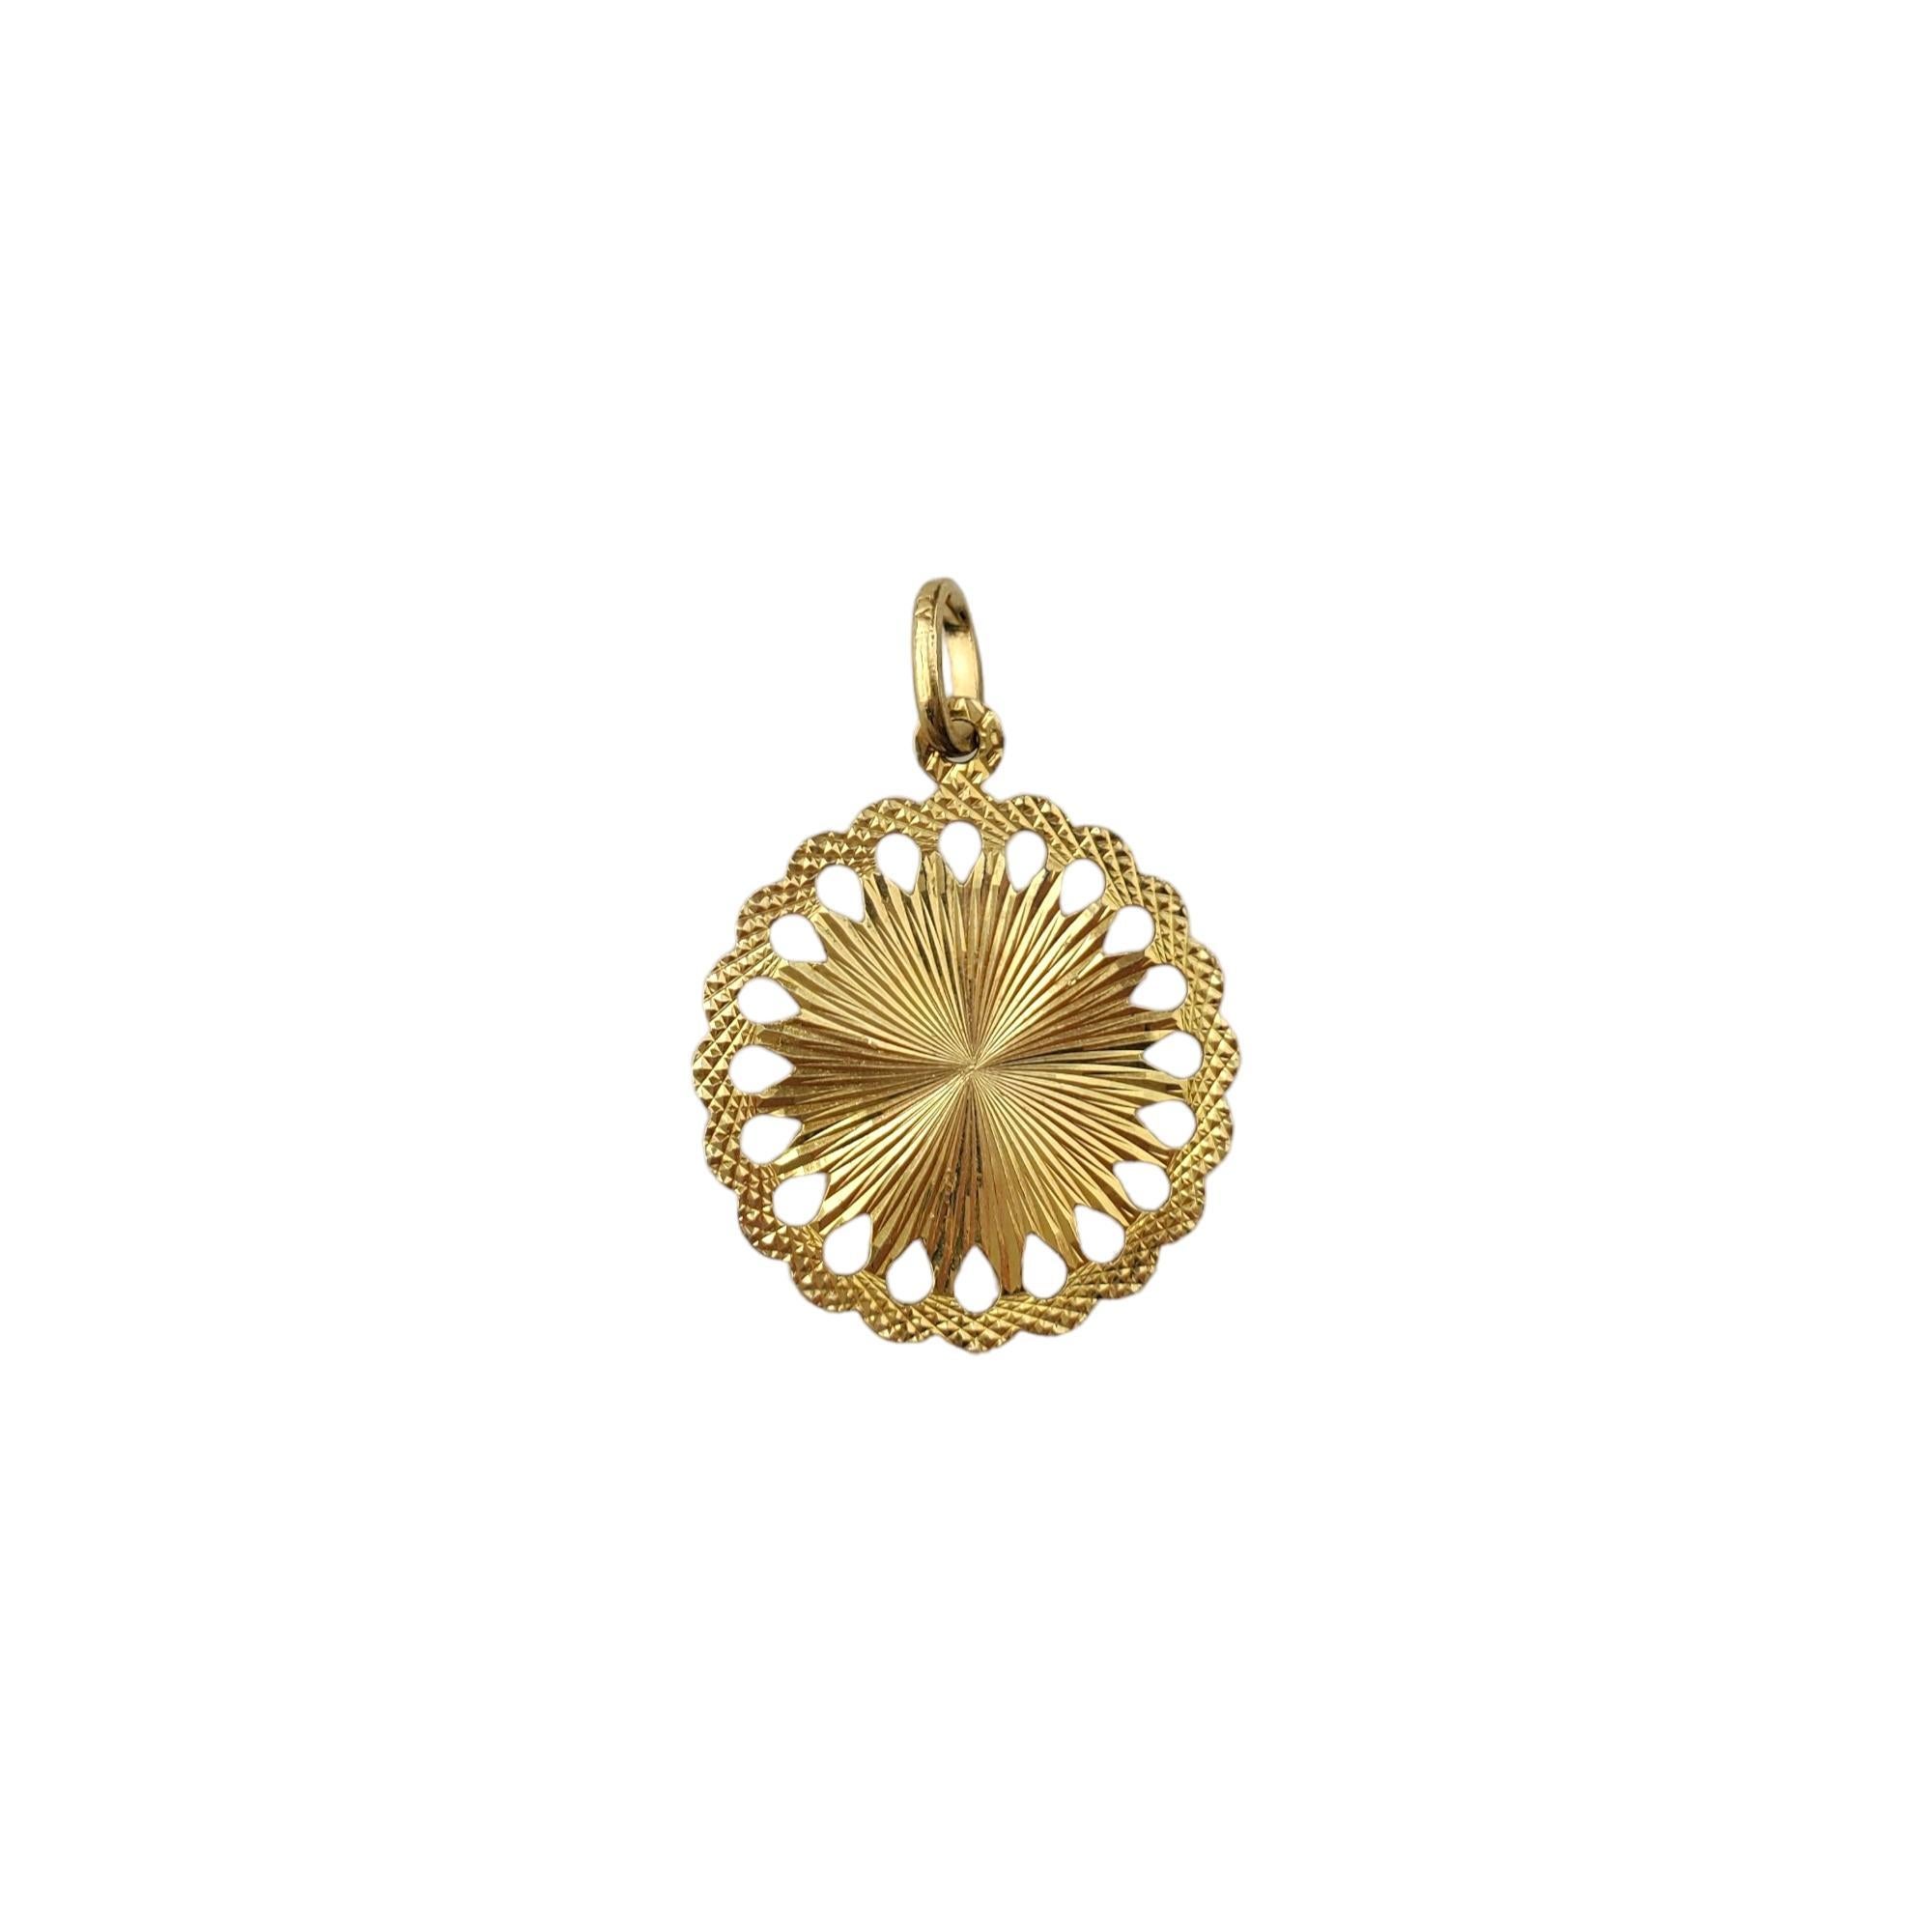 14K Yellow Gold Virgin Mary Pendant 

Meticulously detailed scallop edge pendant depicting the Virgin Mary in 14K yellow gold.

Hallmark: 14

Weight: 1.8 dwt/ 2.79 g

Length w/ bail: 32.67 mm

Size: 26.86 mm X 22.73 mm X 1.9 mm

Very good condition,